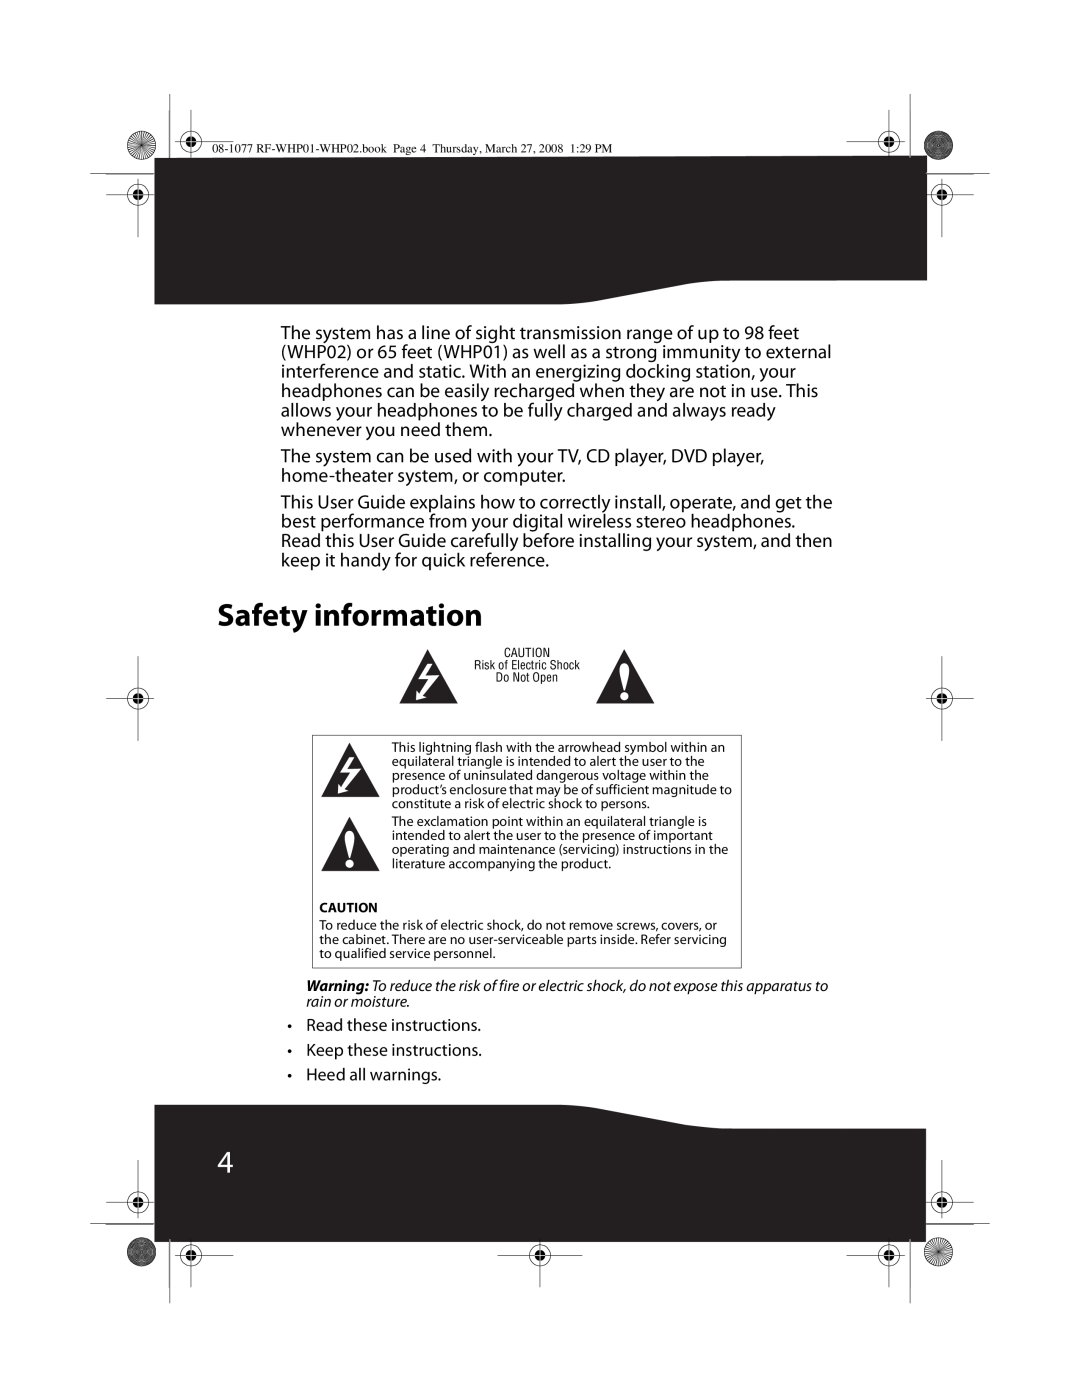 RocketFish RF-WHP01, RF-WHP02 manual Safety information, Read these instructions Keep these instructions, Heed all warnings 